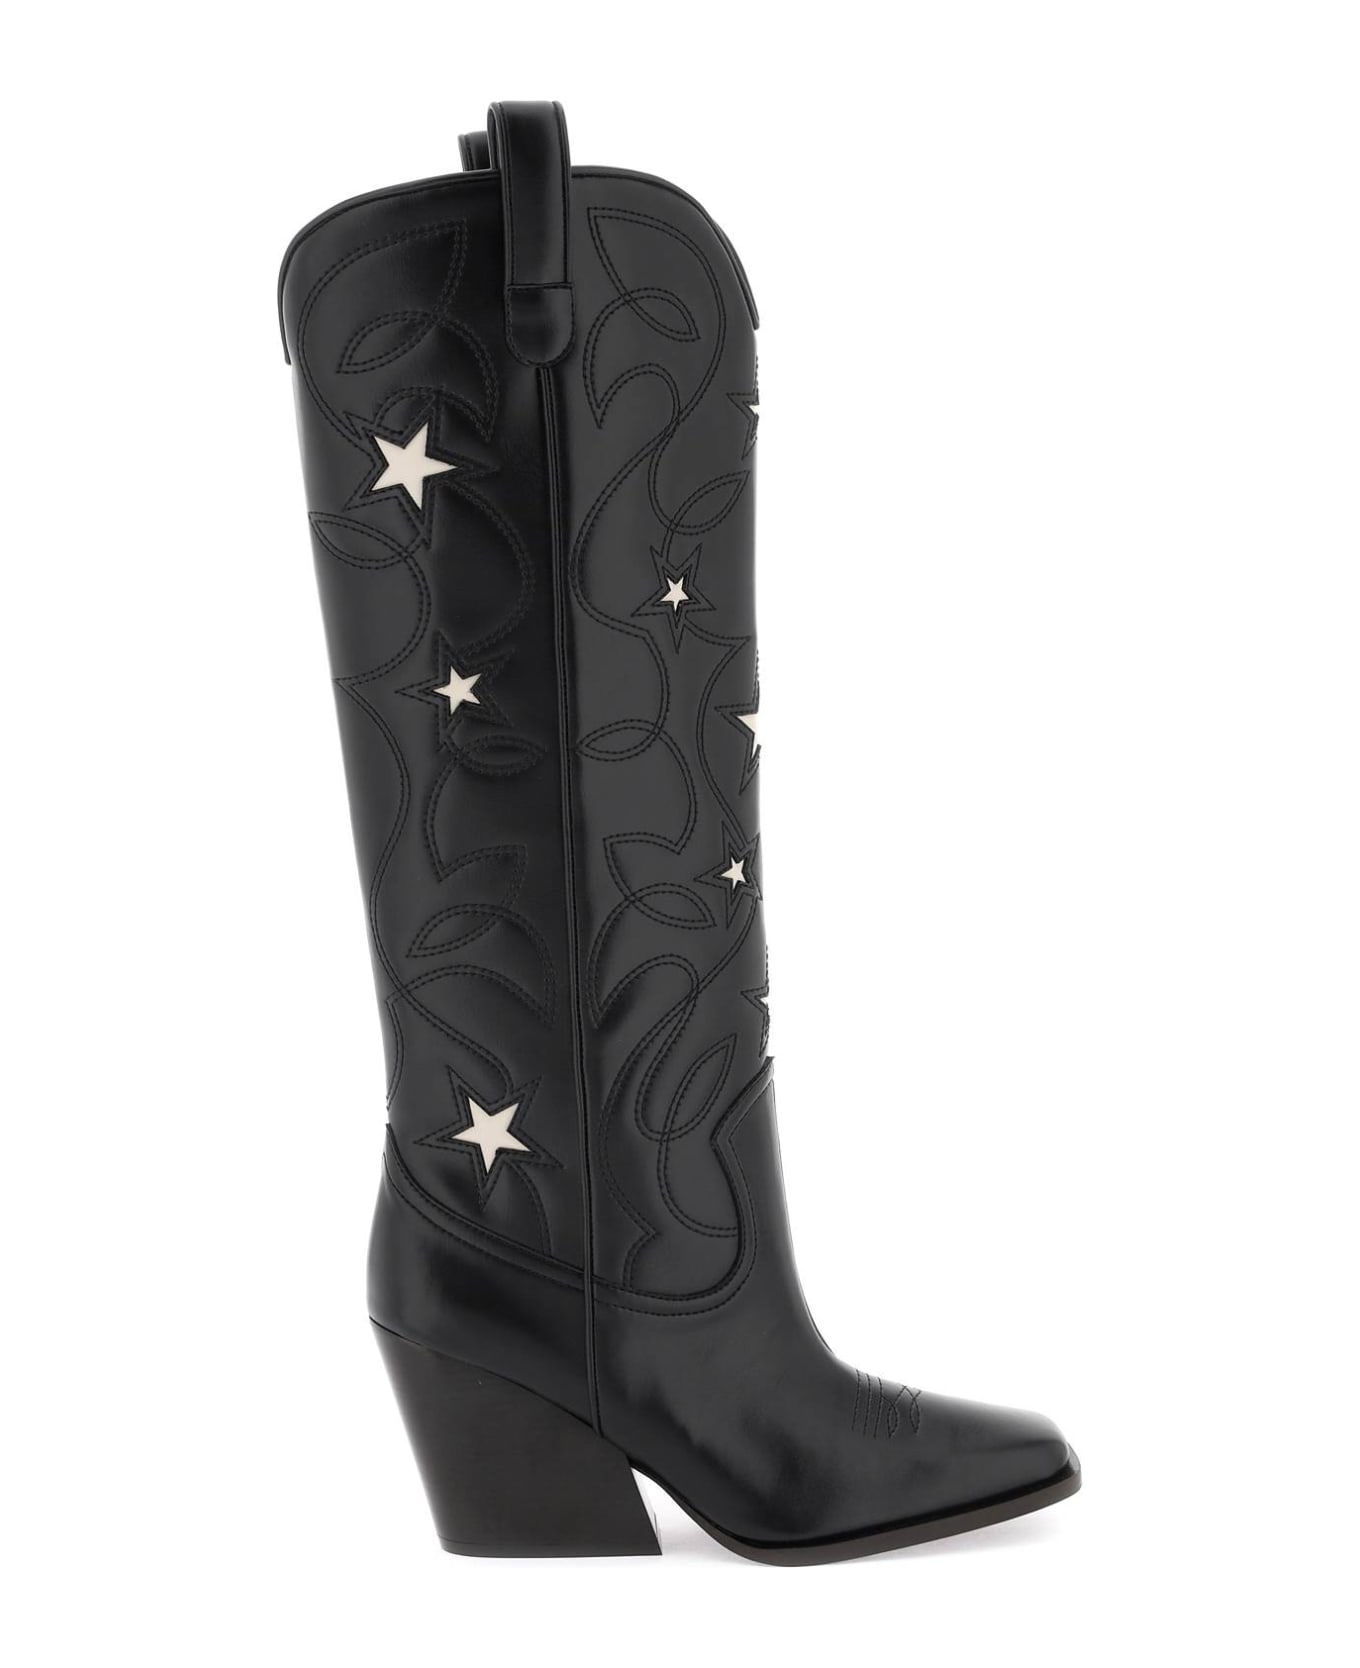 Stella McCartney Texan Boots With Star Embroidery - BLACK STONE (Black)